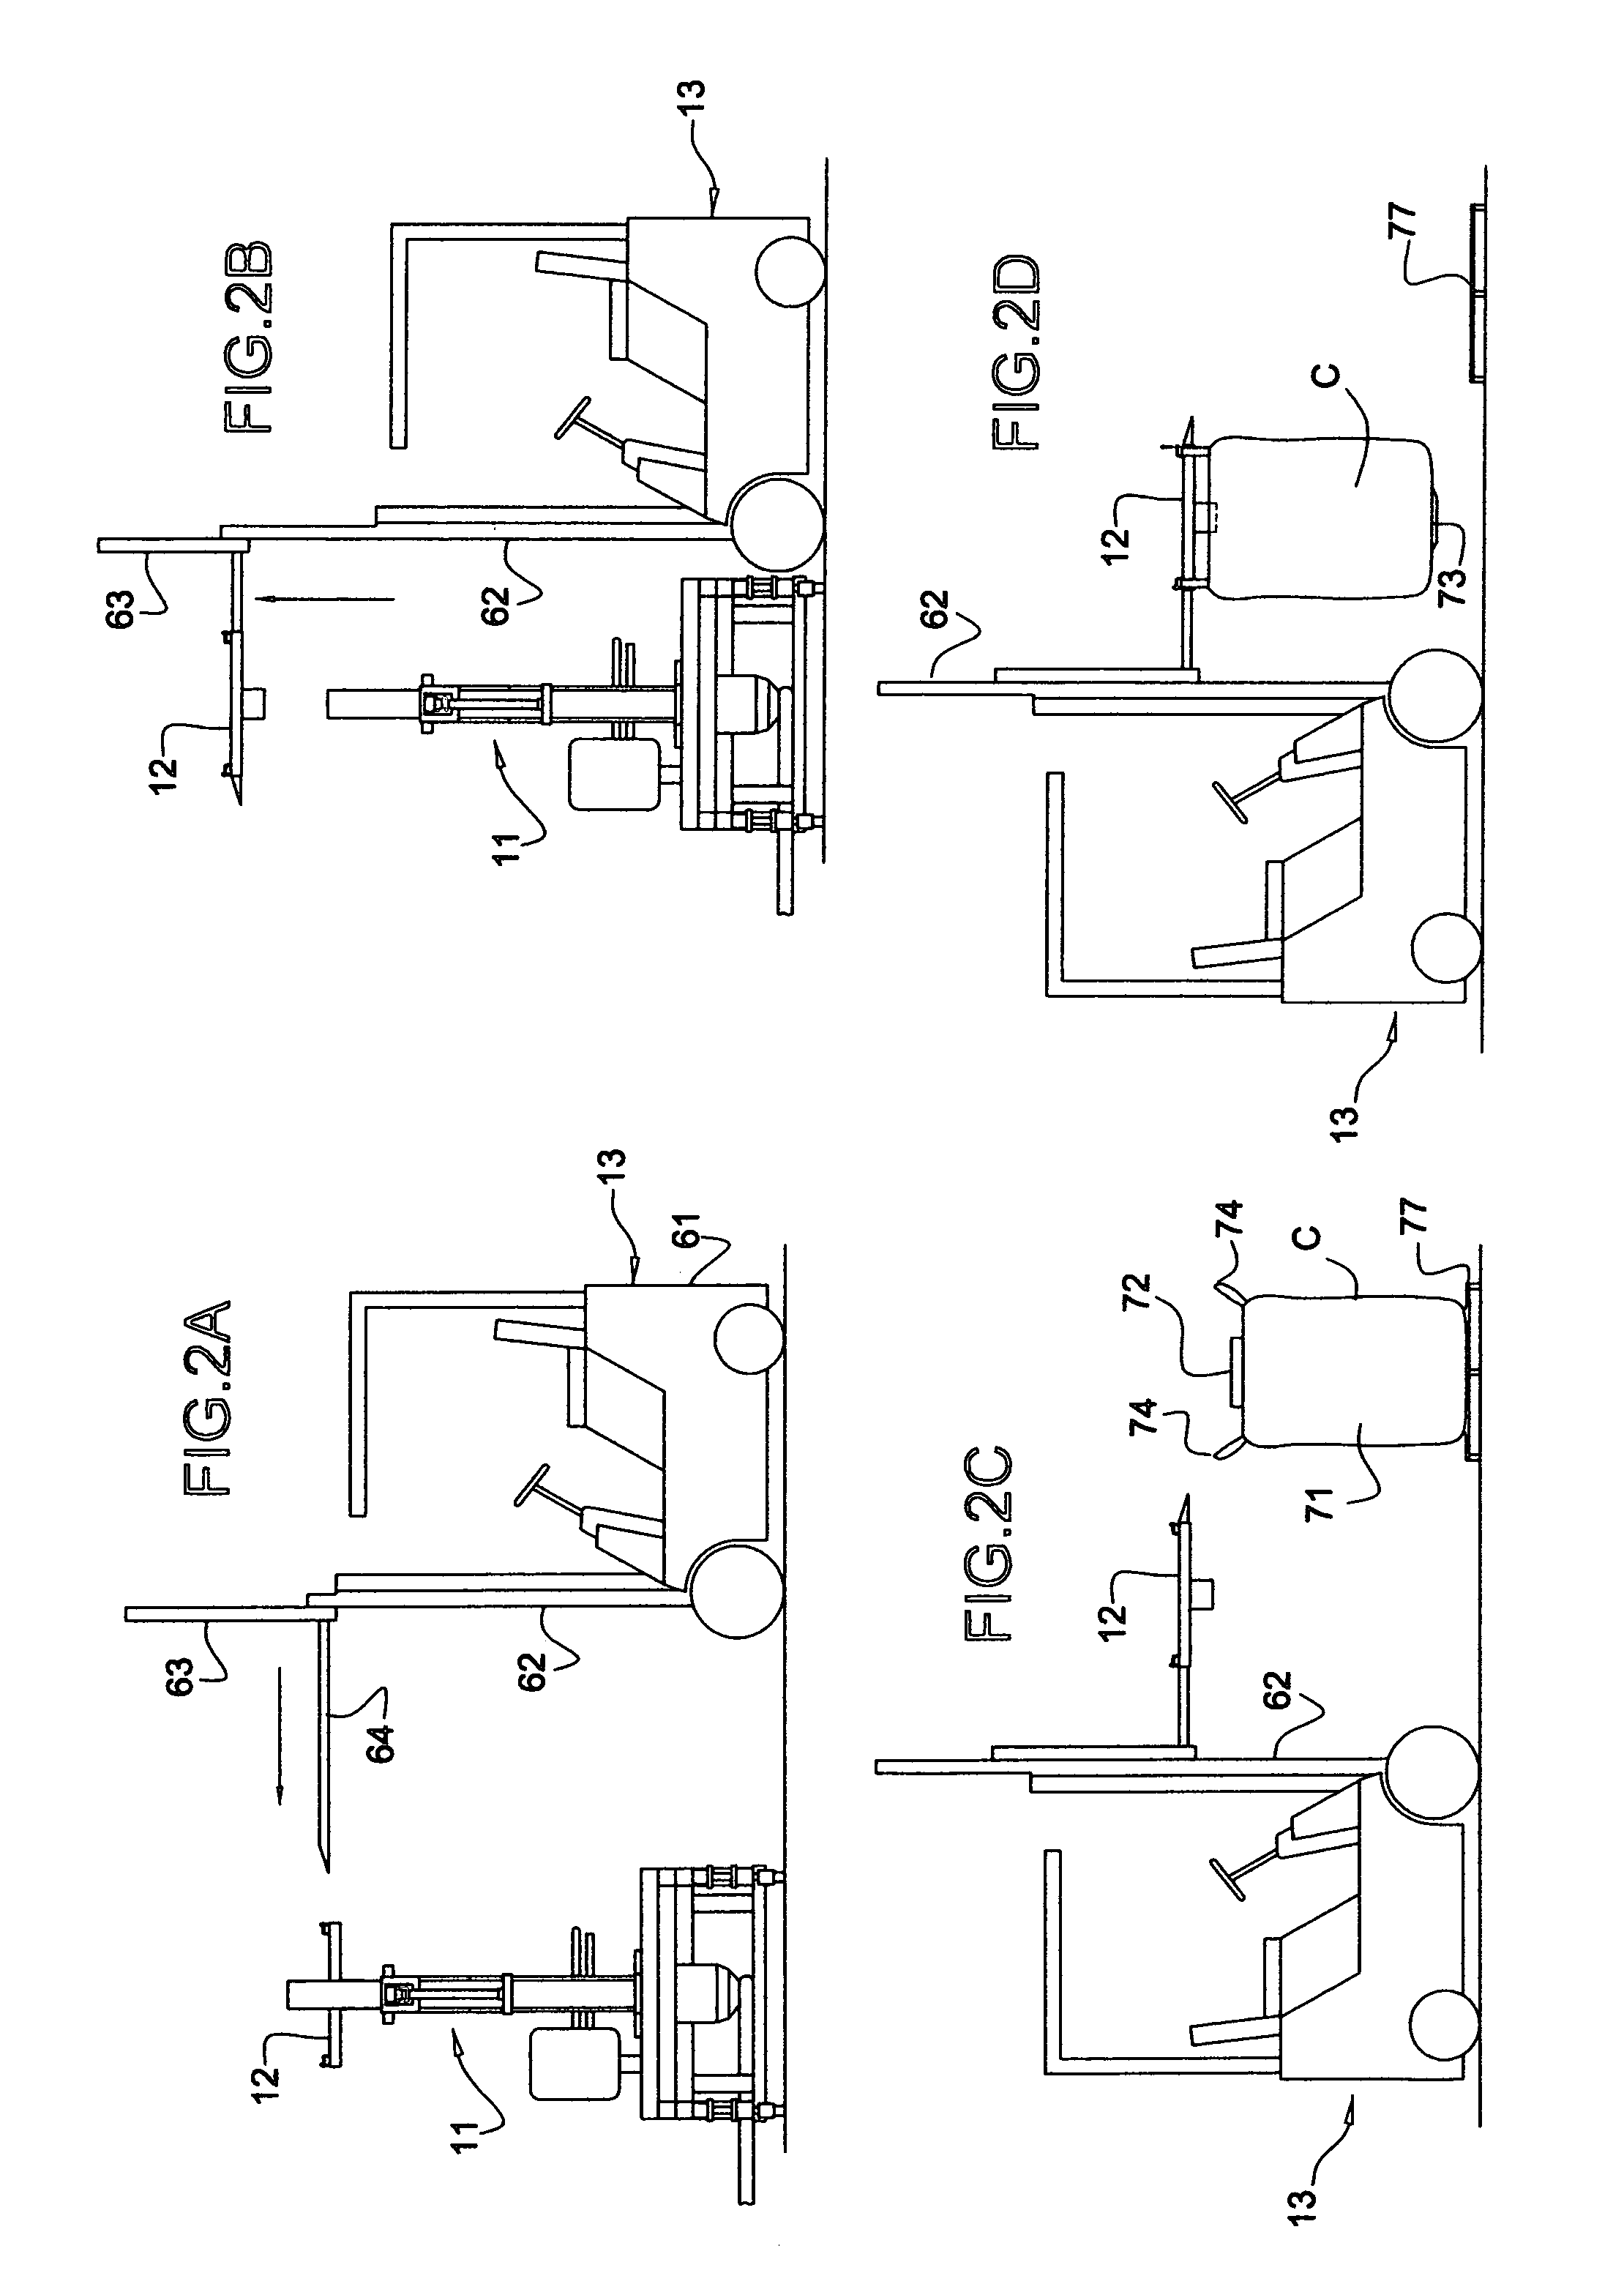 System and method for handling containers of bulk particulate materials